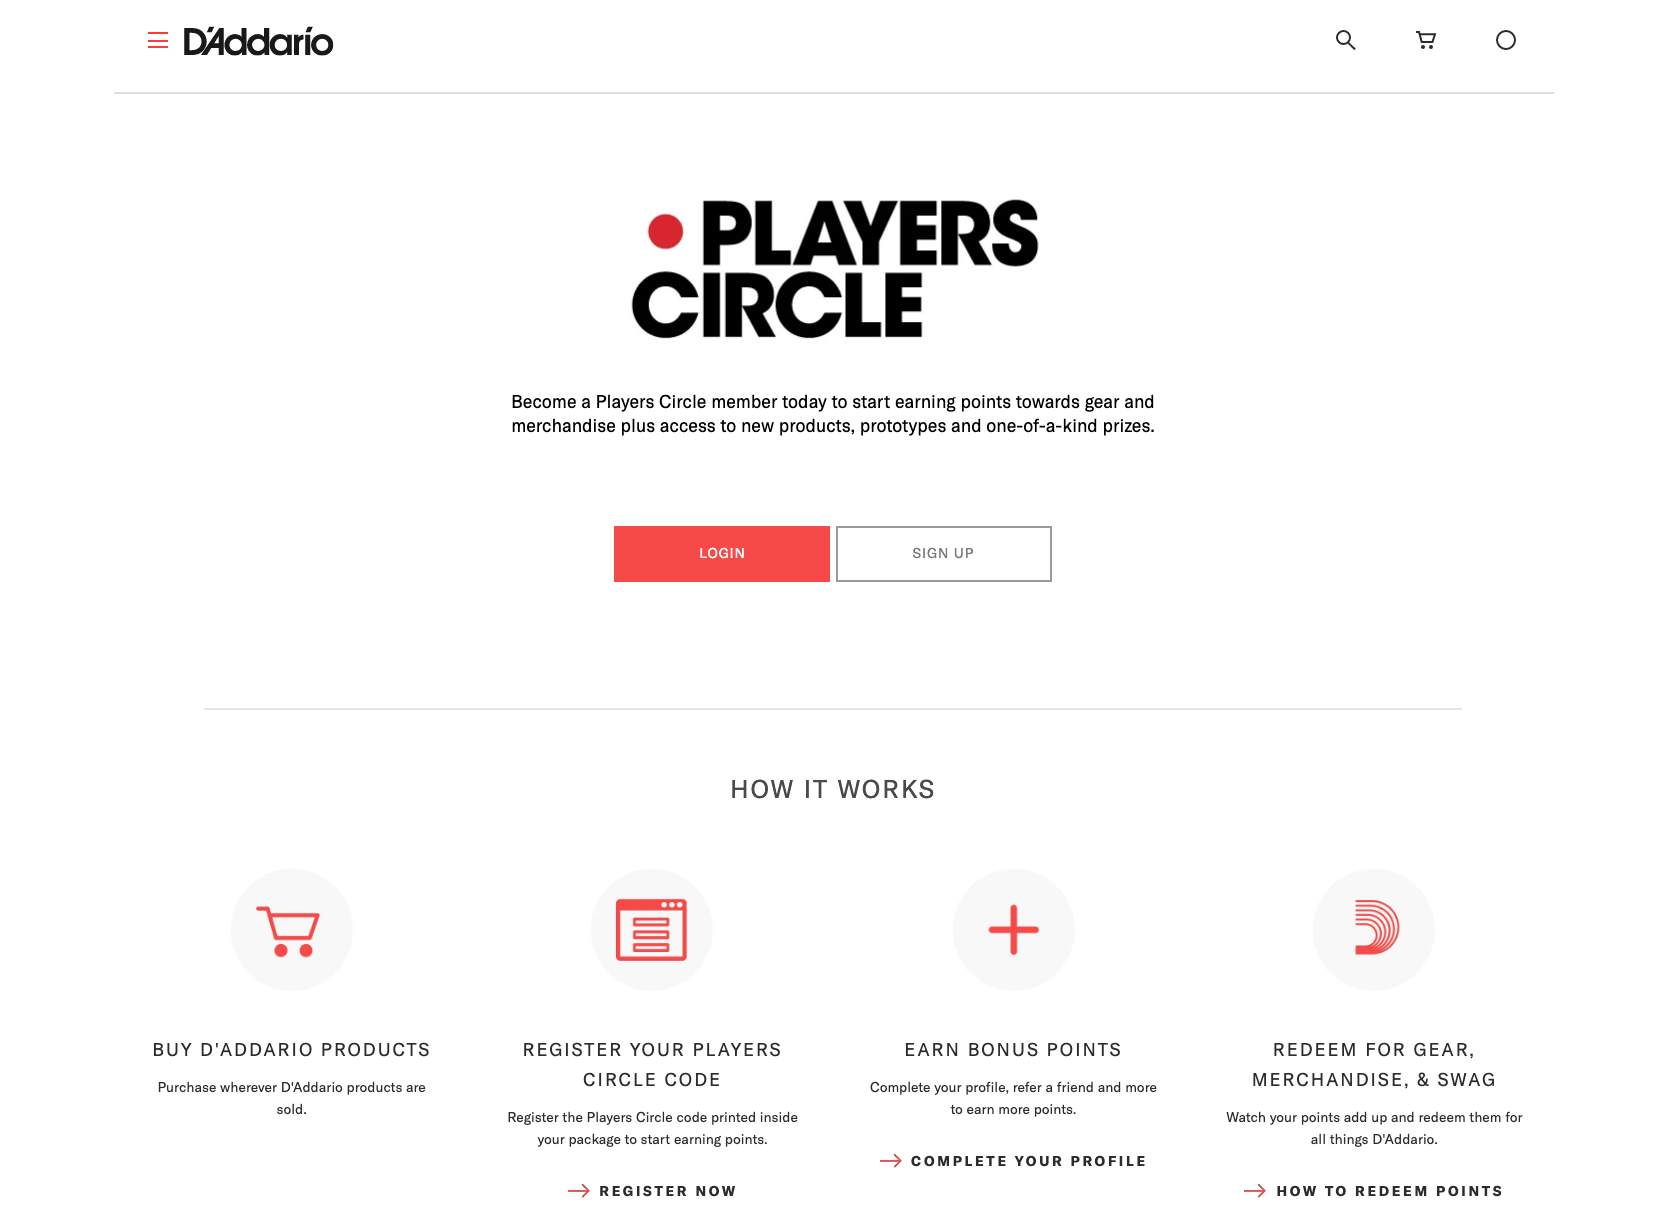 D'Addario players circle explainer page